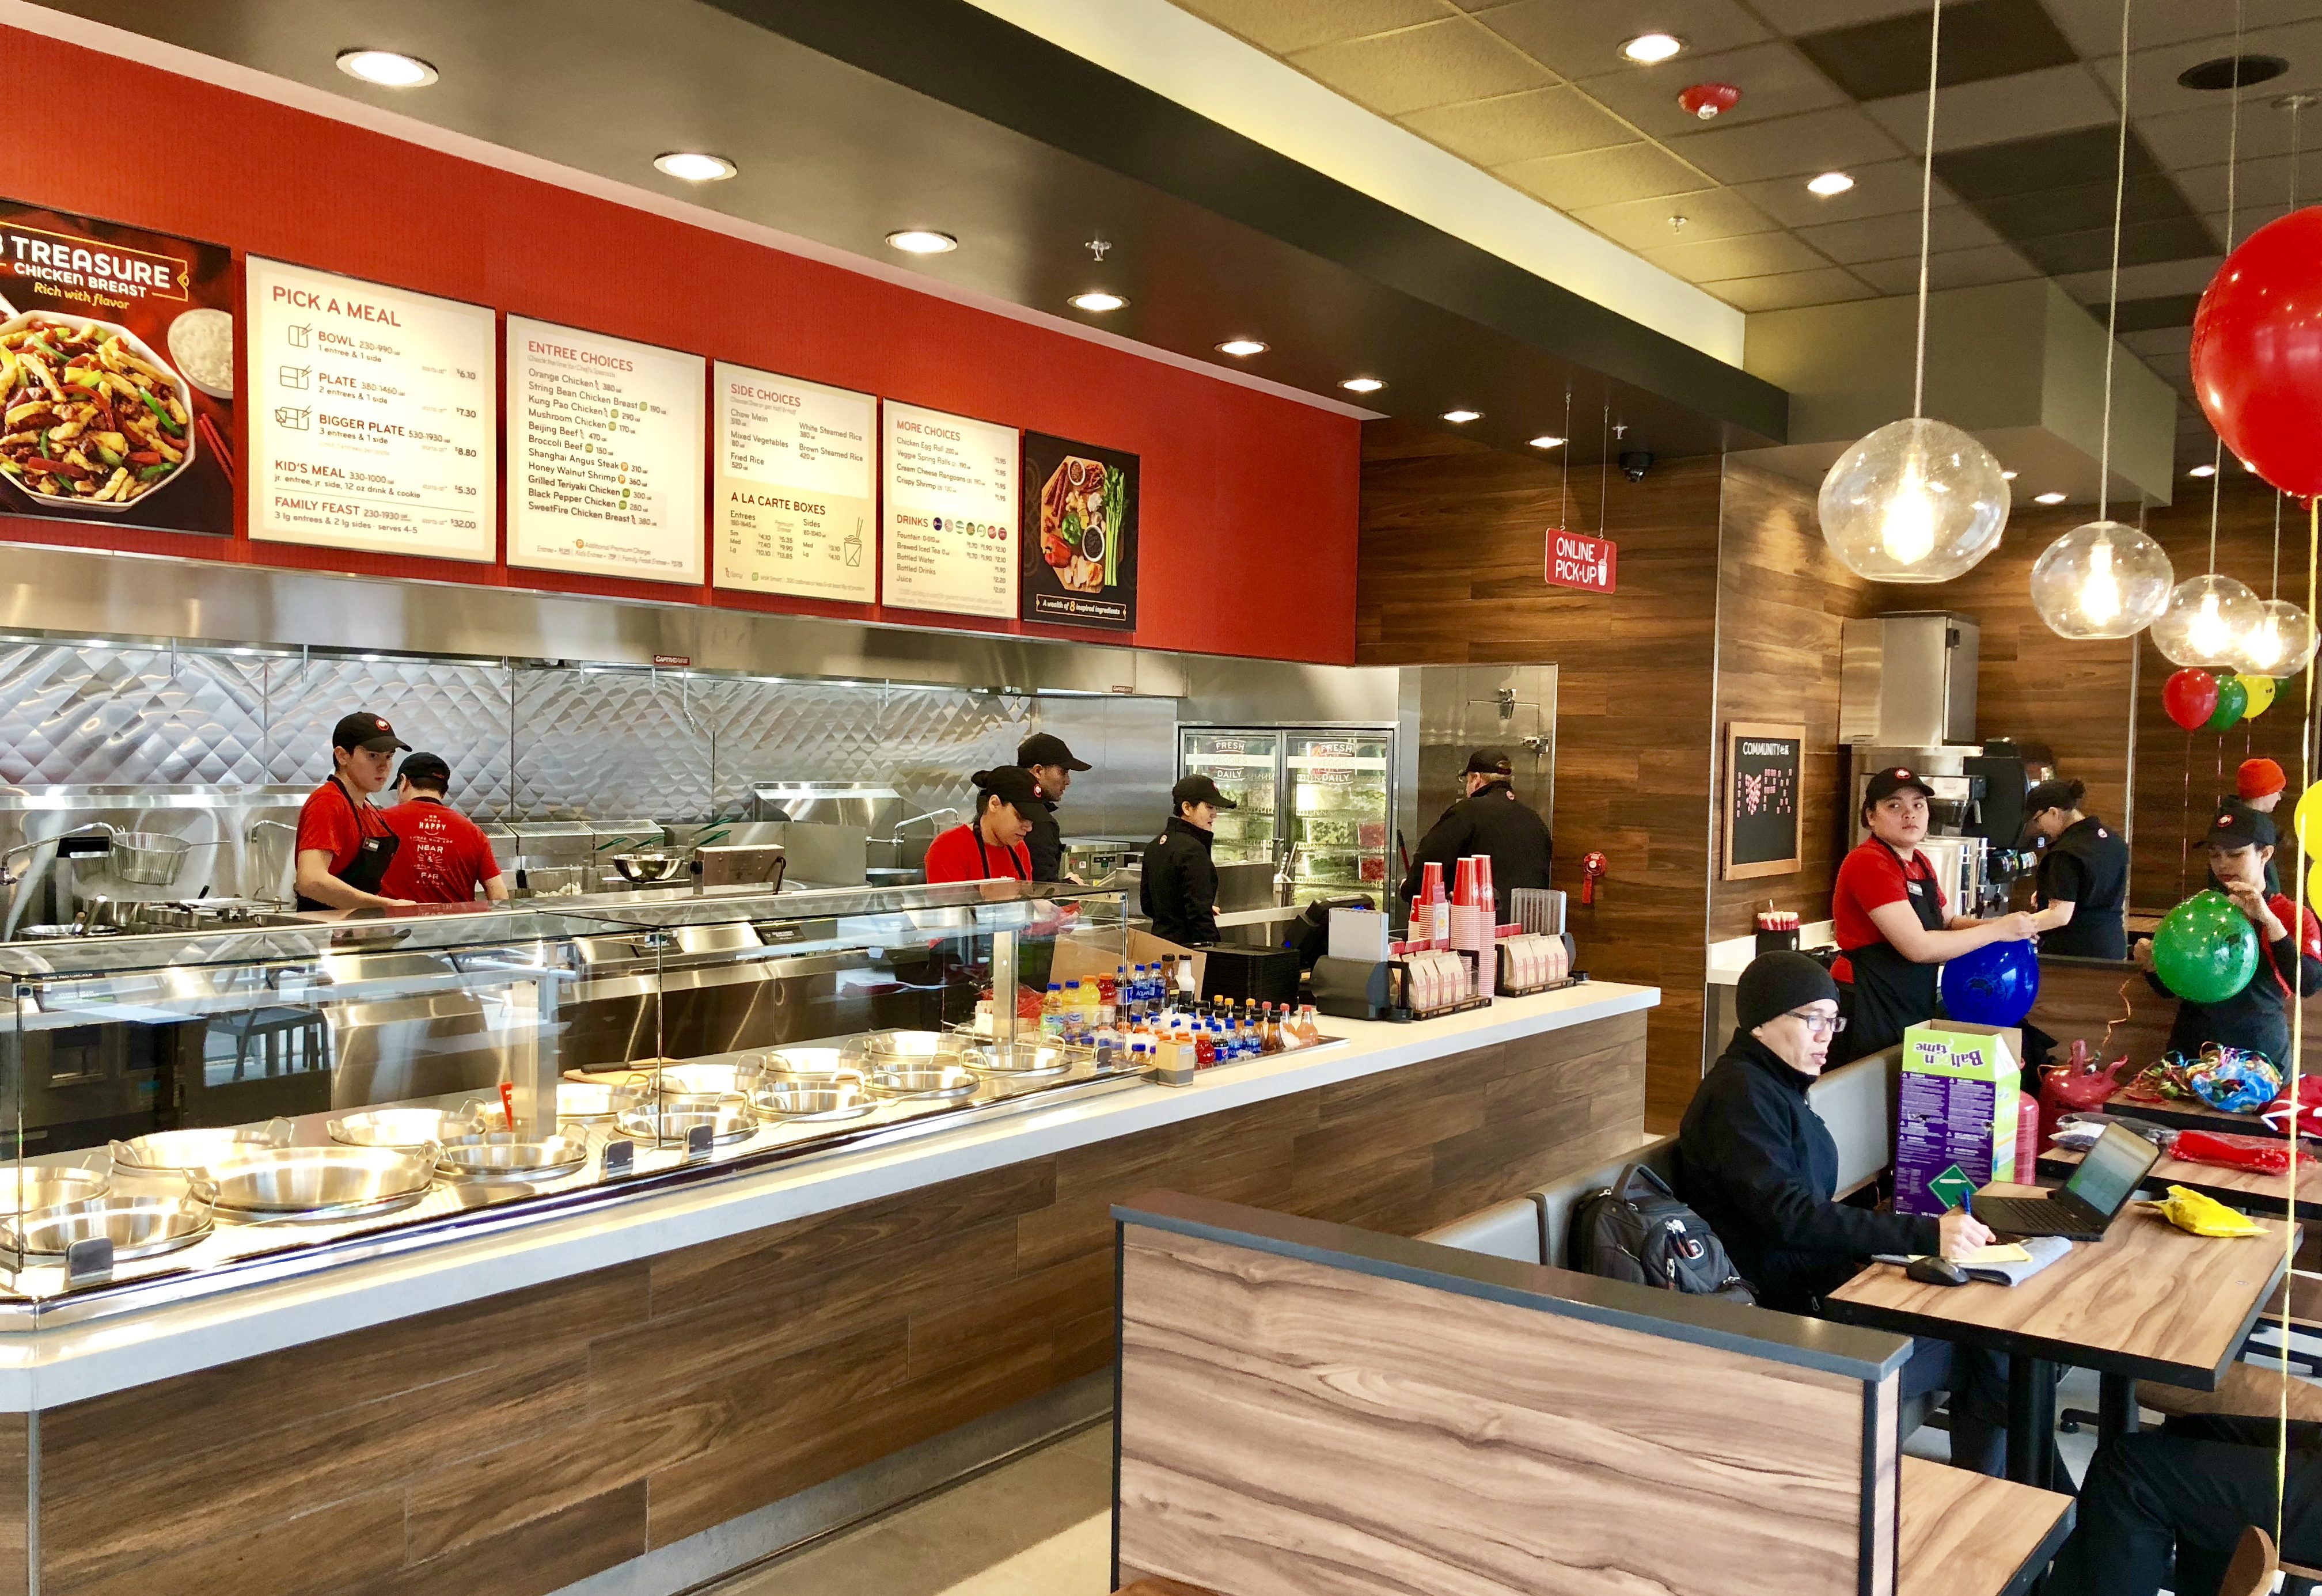 PANDA EXPRESS HOLDS GRAND OPENING TODAY - The Burn